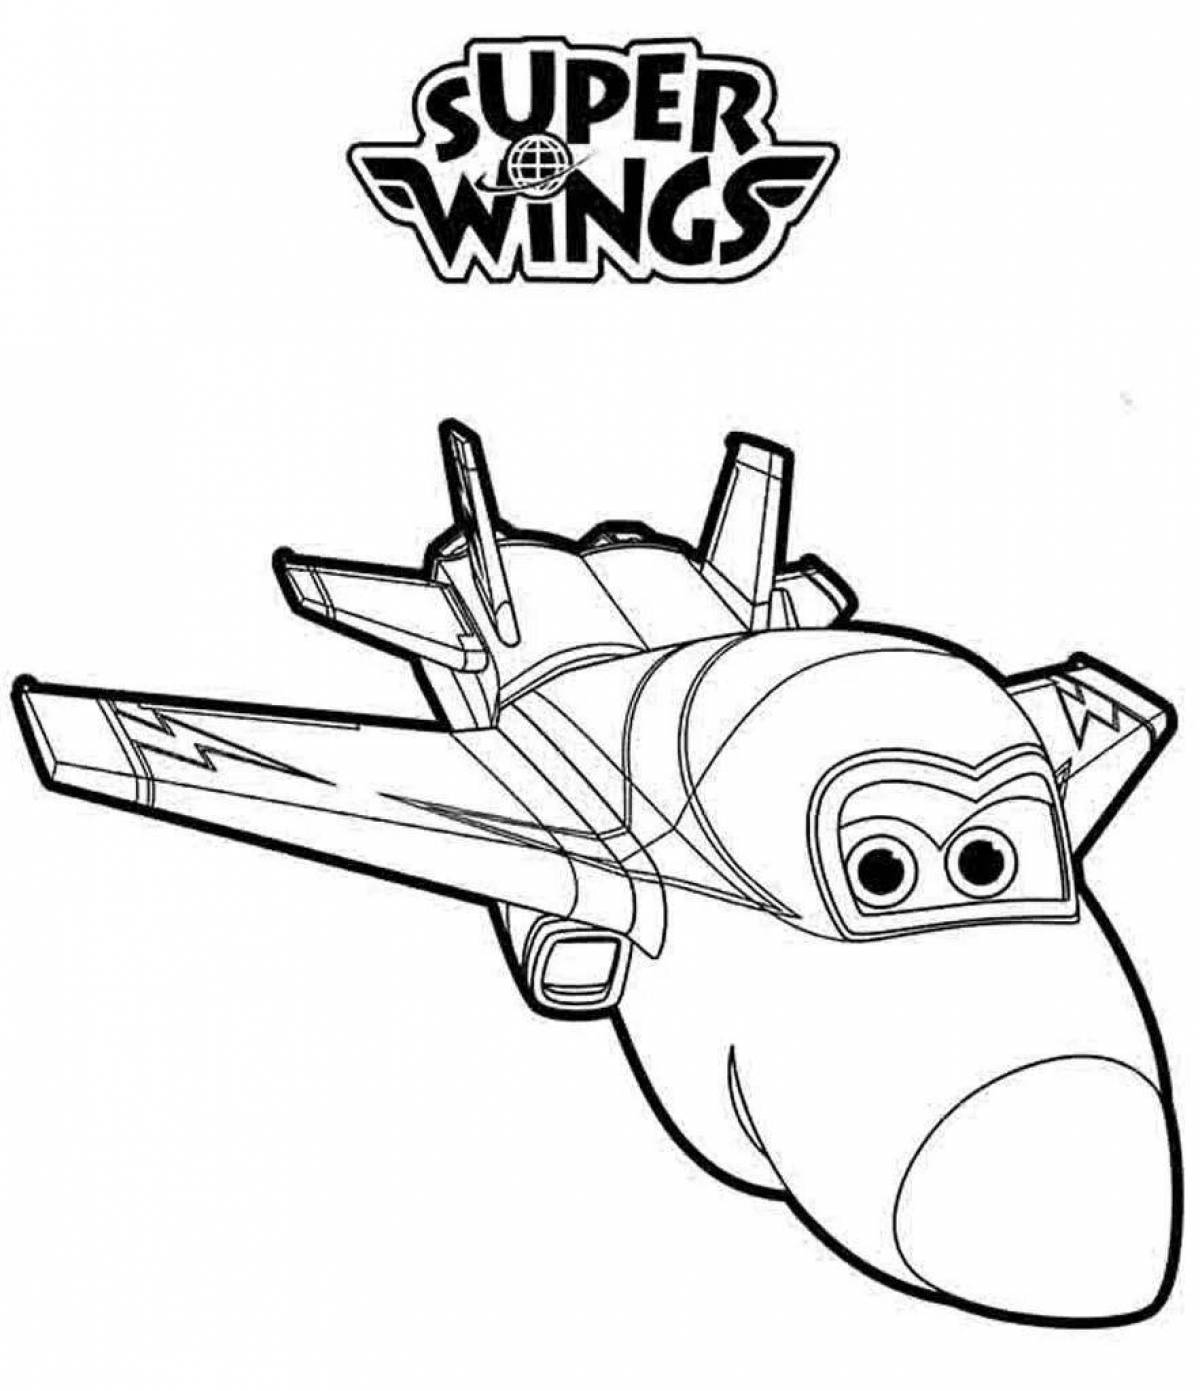 Jerome super wings glamor coloring book